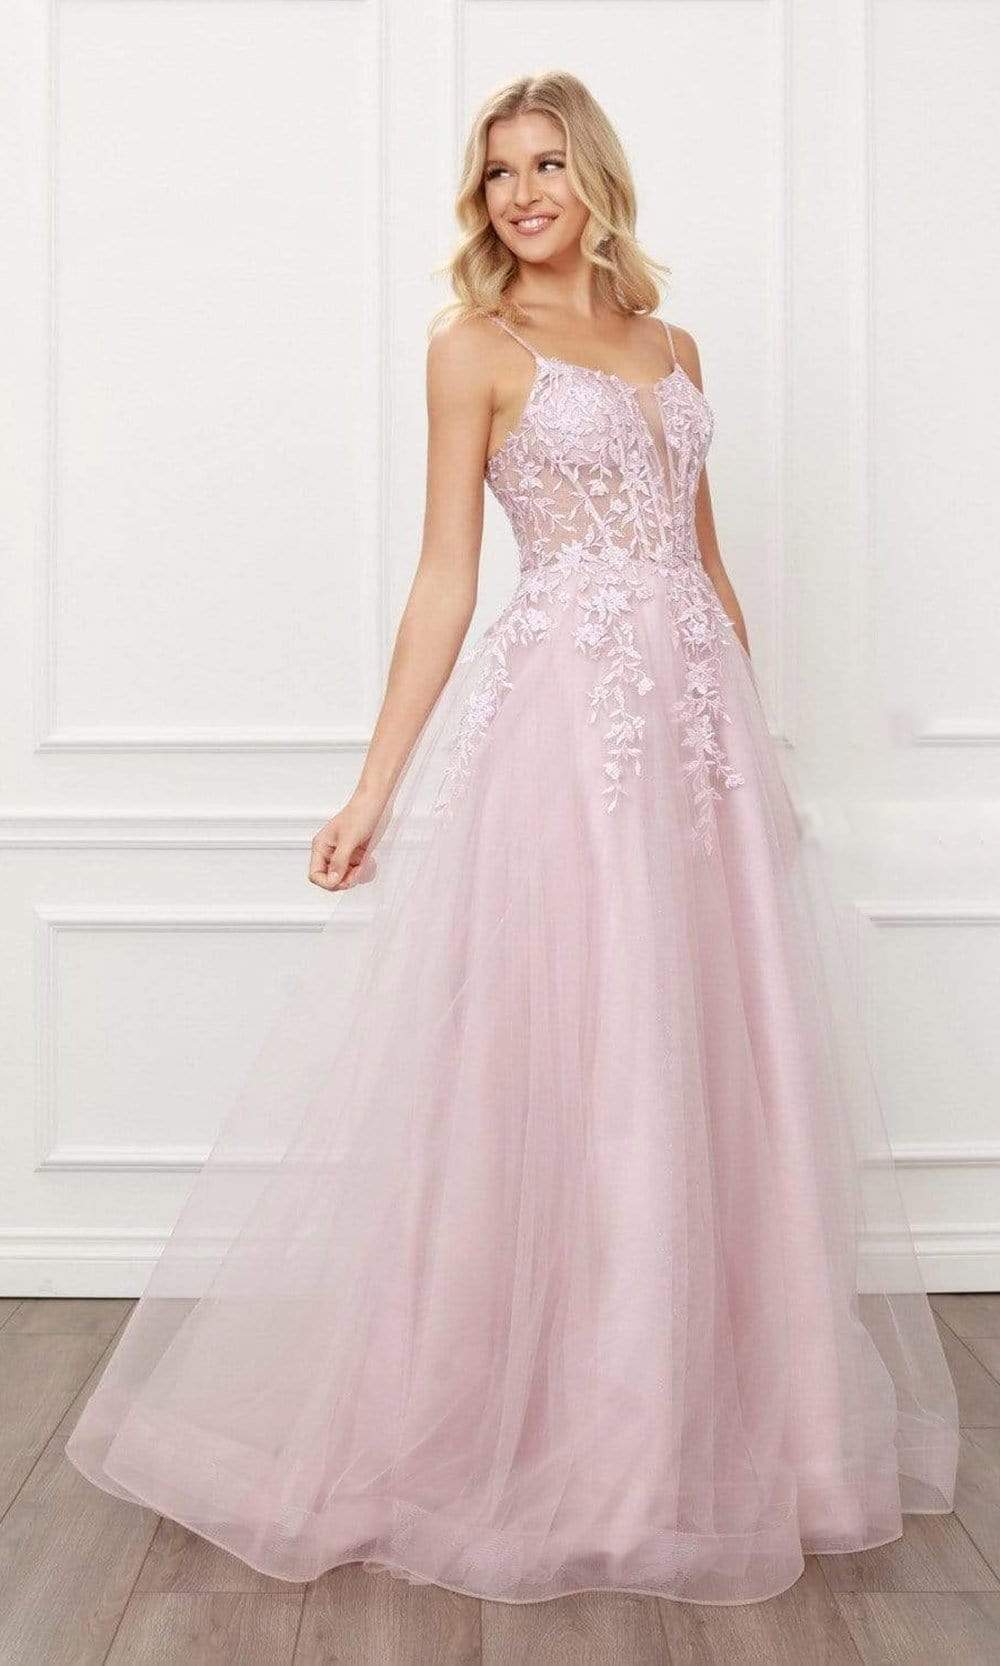 Nox Anabel - T449 Scoop Neck A-line Prom Dress
